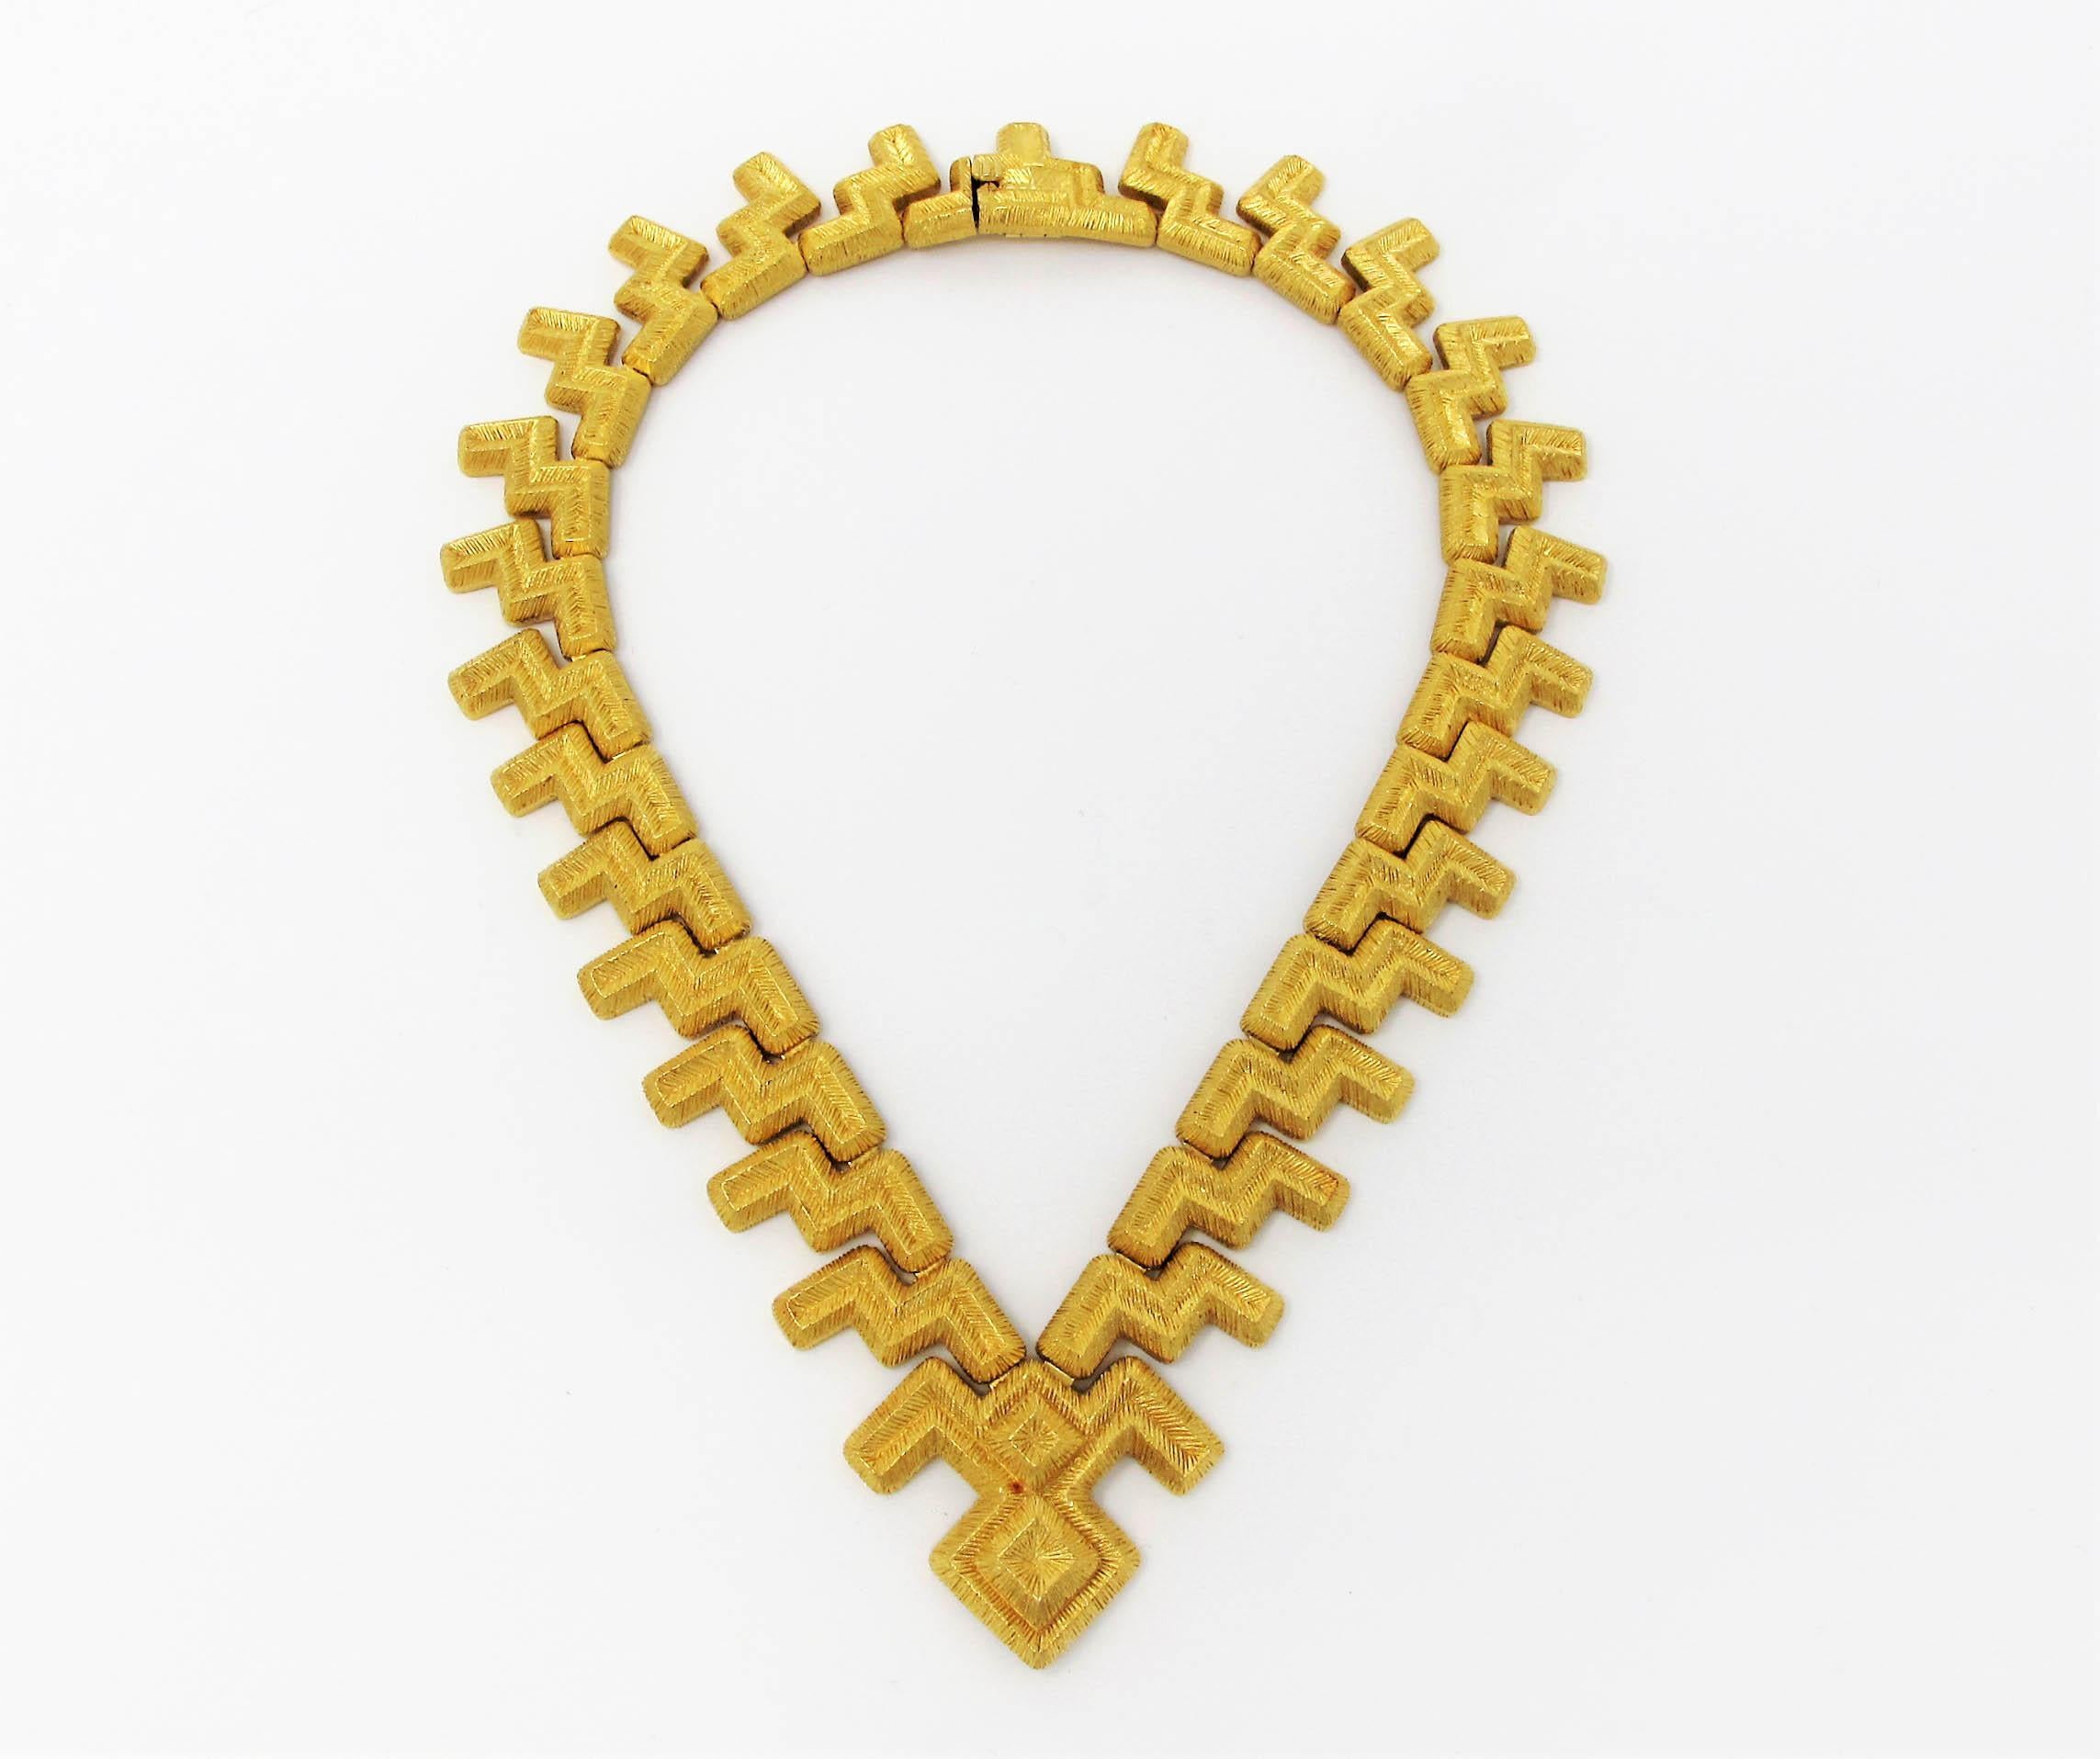 Elevate your style with this sophisticated 18 karat yellow gold zig-zag necklace by Mapamenos Natepas. 

The beautifully made solid gold necklace features textured 18 karat yellow gold zig-zag designs hanging vertically and facing opposite